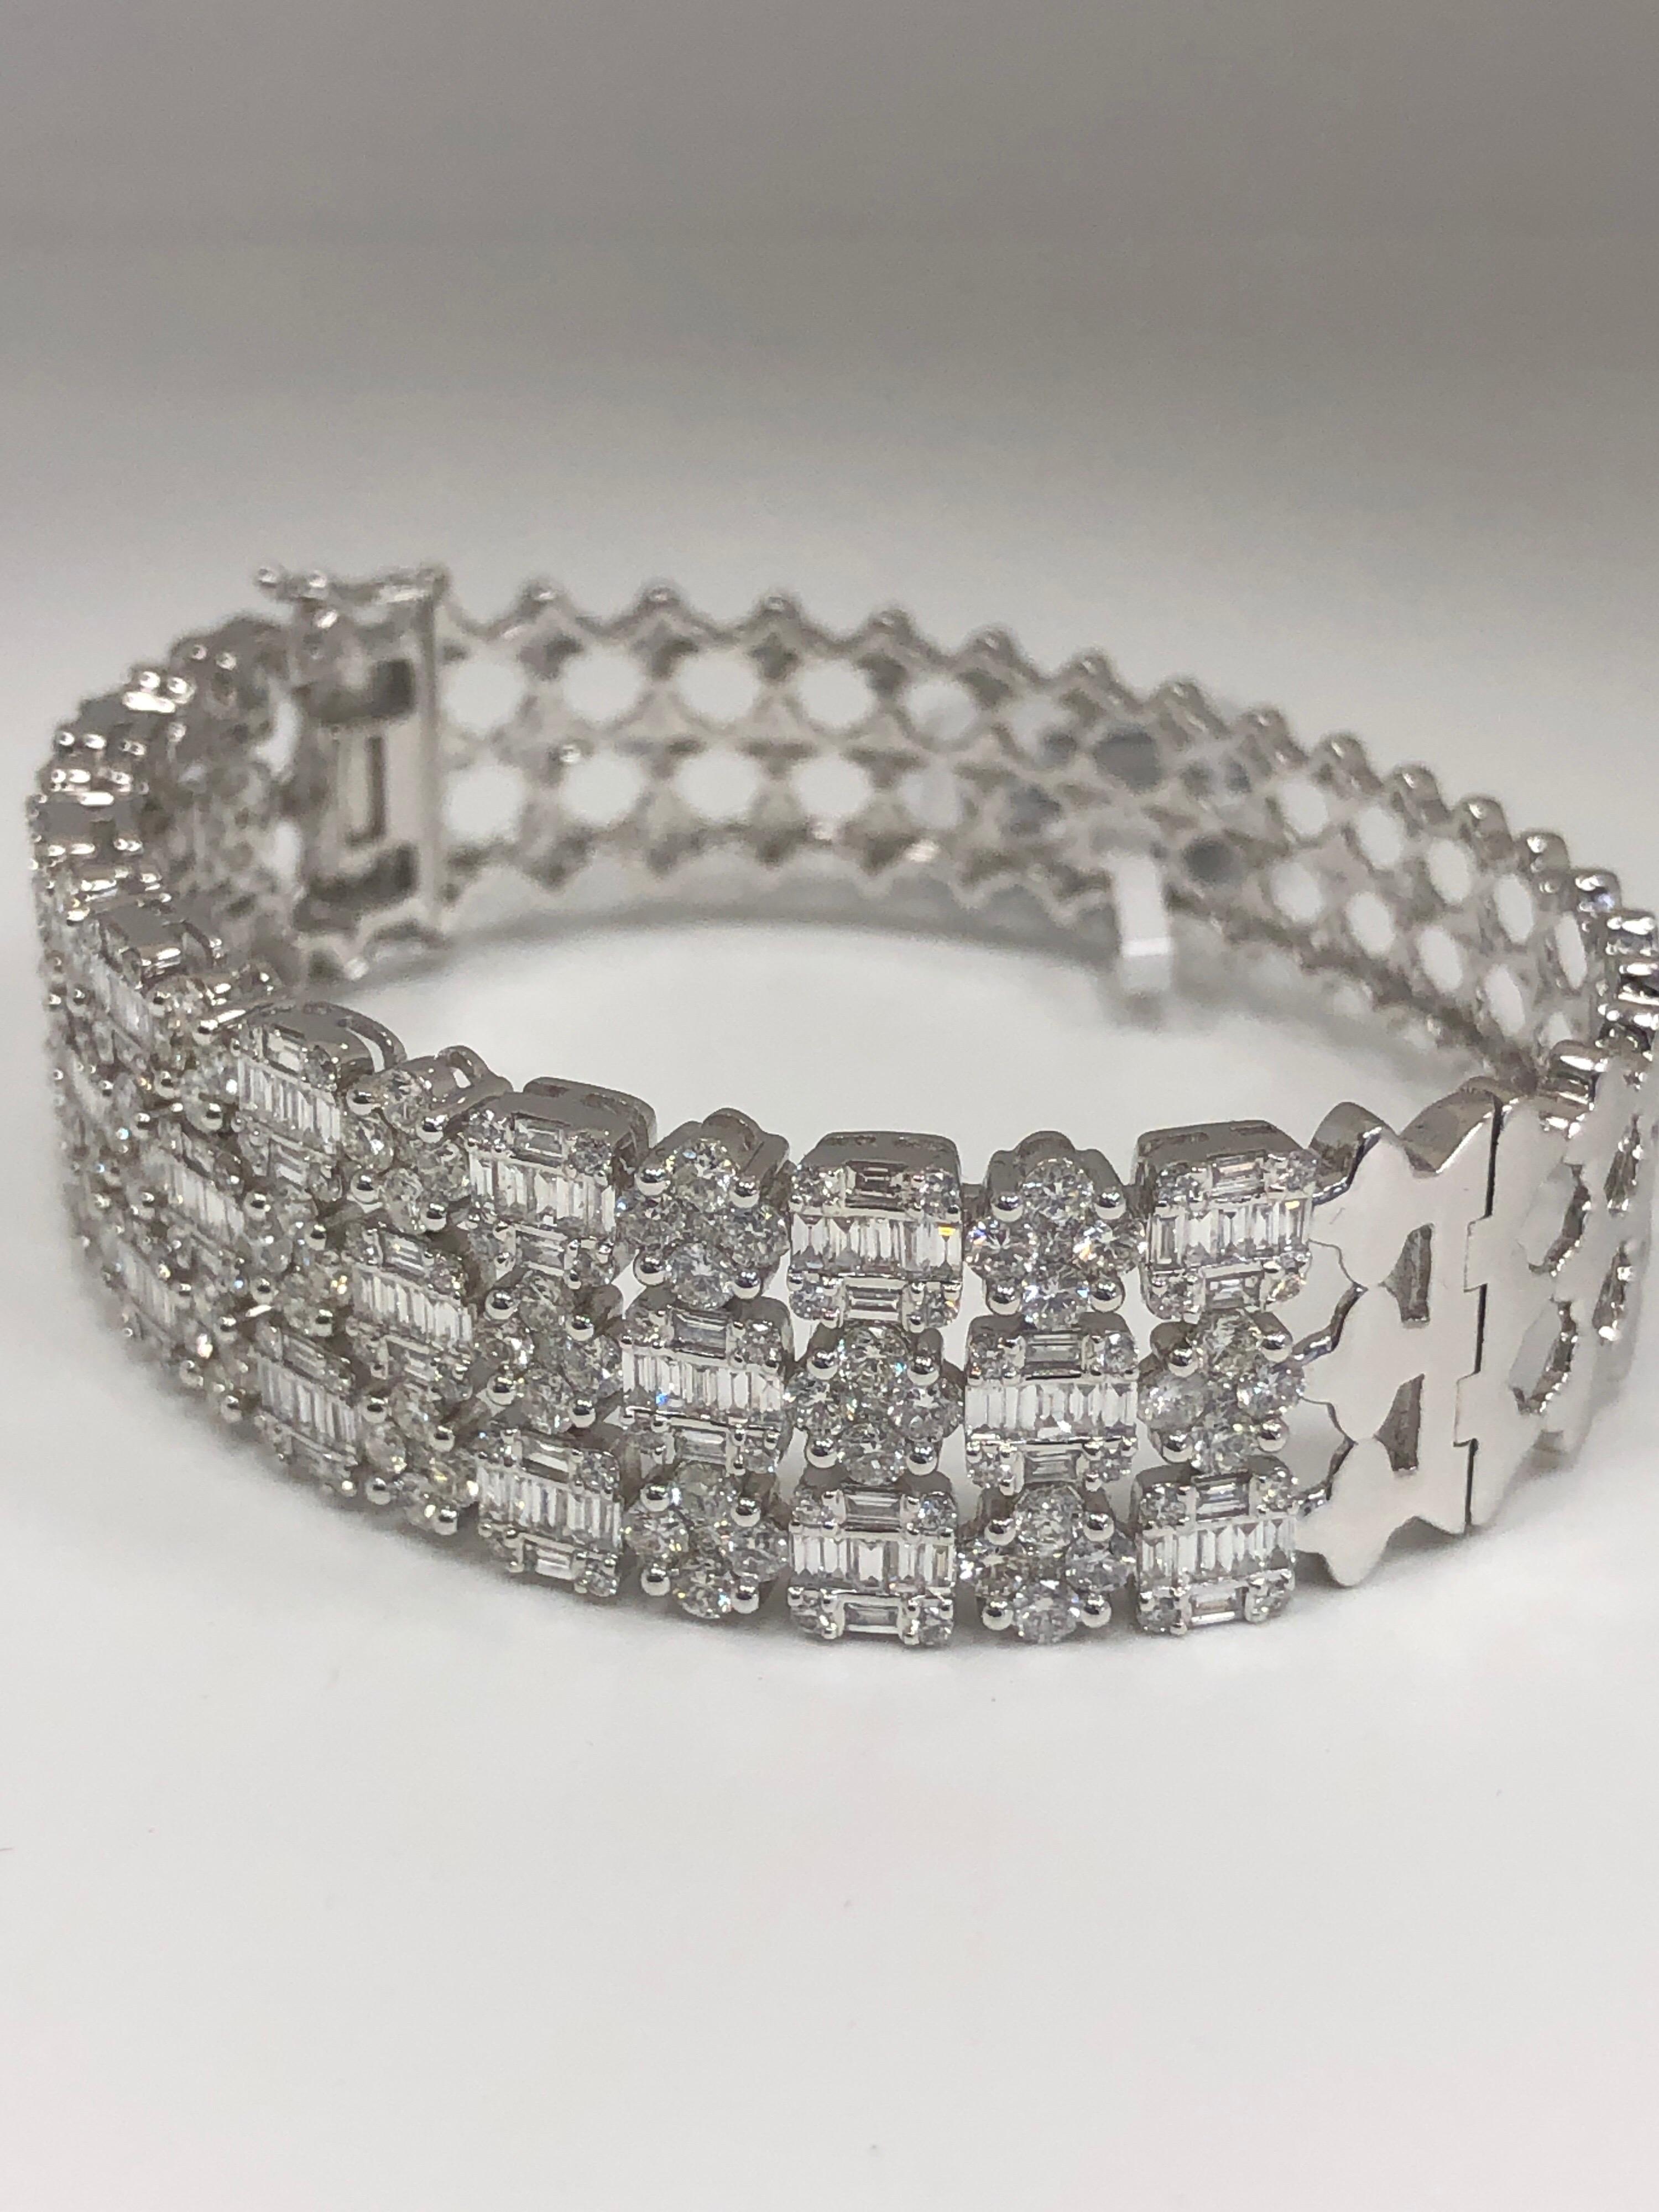 The hinged cuff, crafted in 18K white gold, is mounted in cluster design with round brilliant cut and baguette diamonds totaling 6.79 carats.